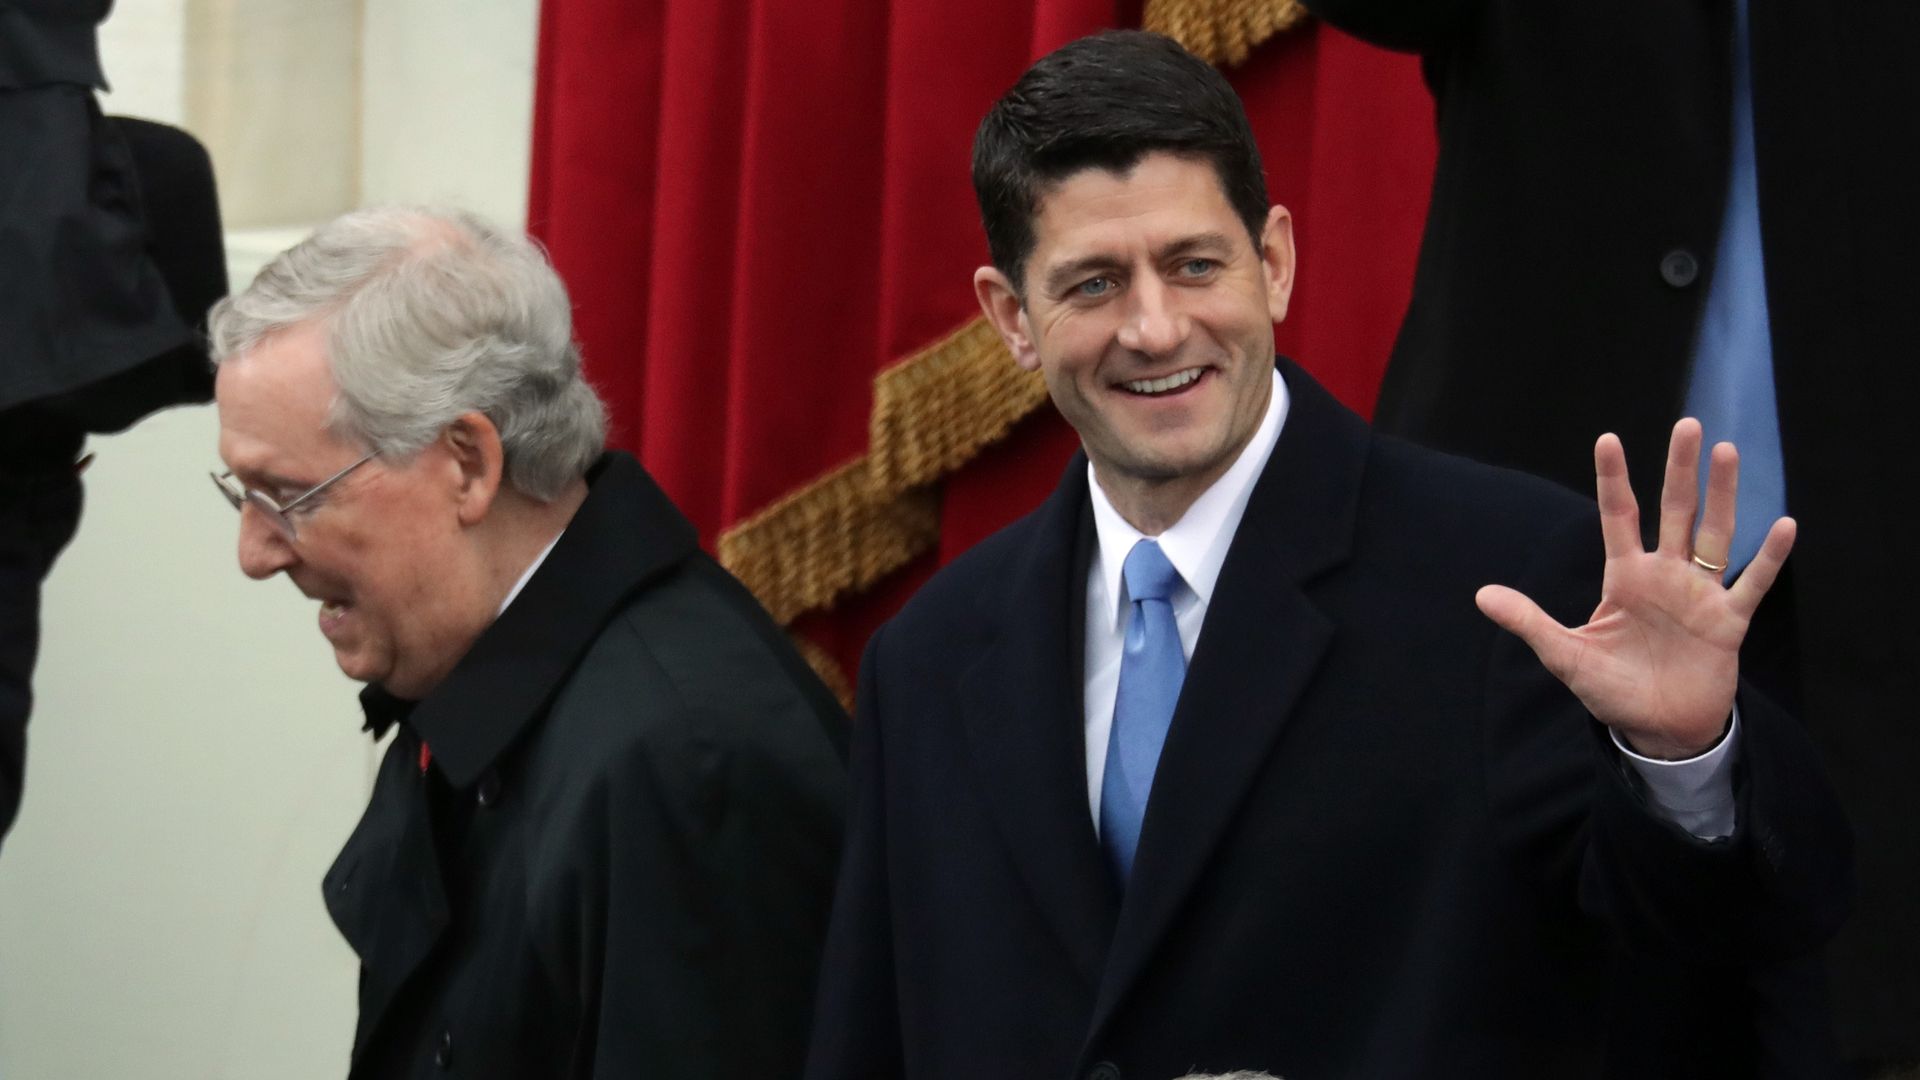 Senate Majority Leader Mitch McConnell and House Speaker Paul Ryan